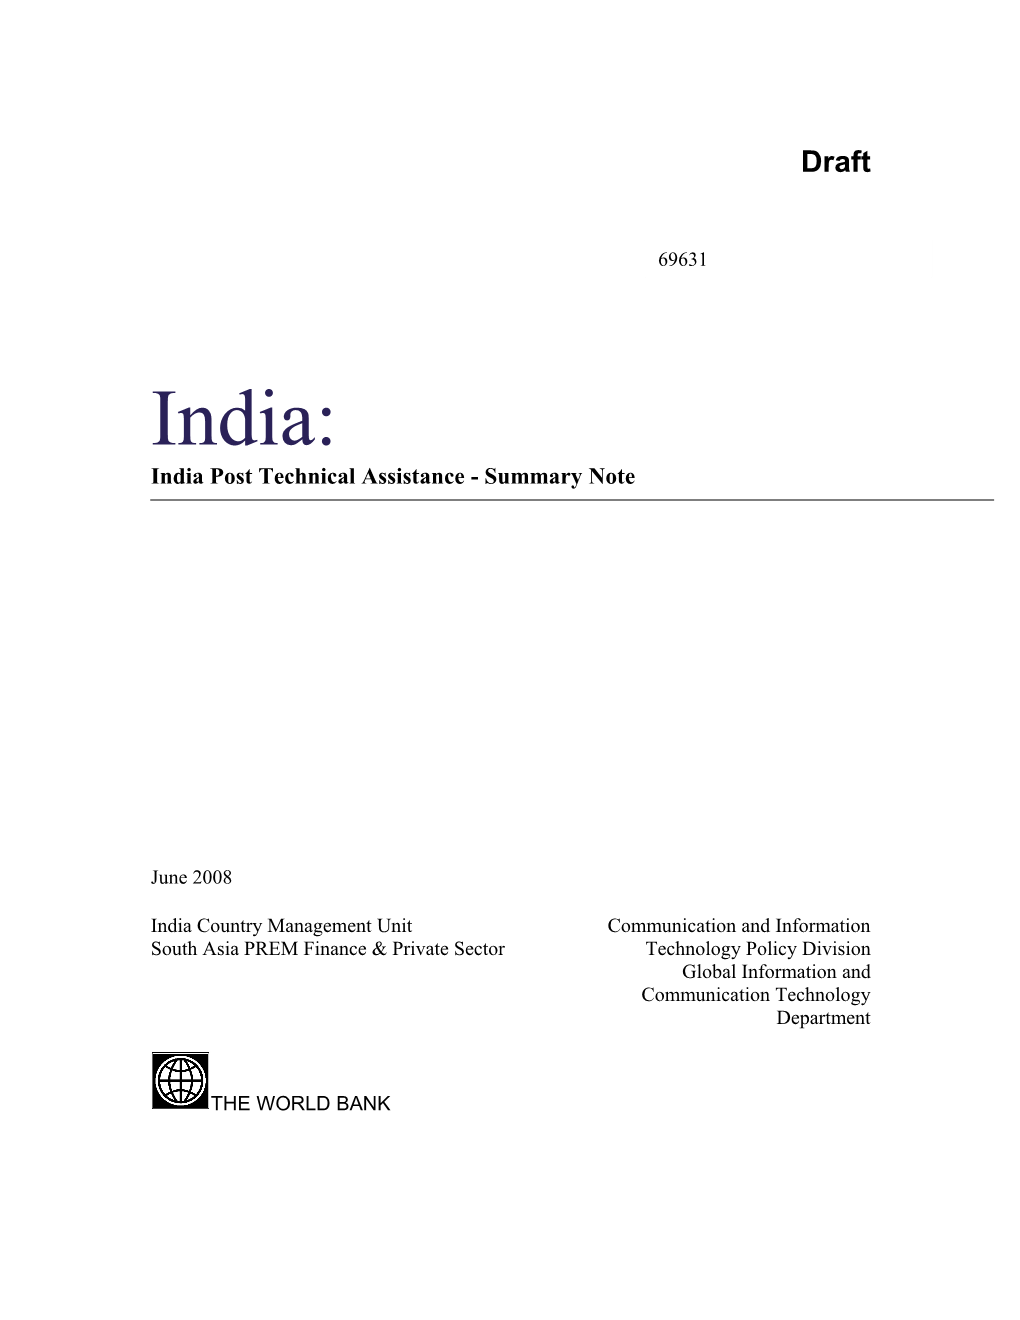 India Post Technical Assistance - Summary Note